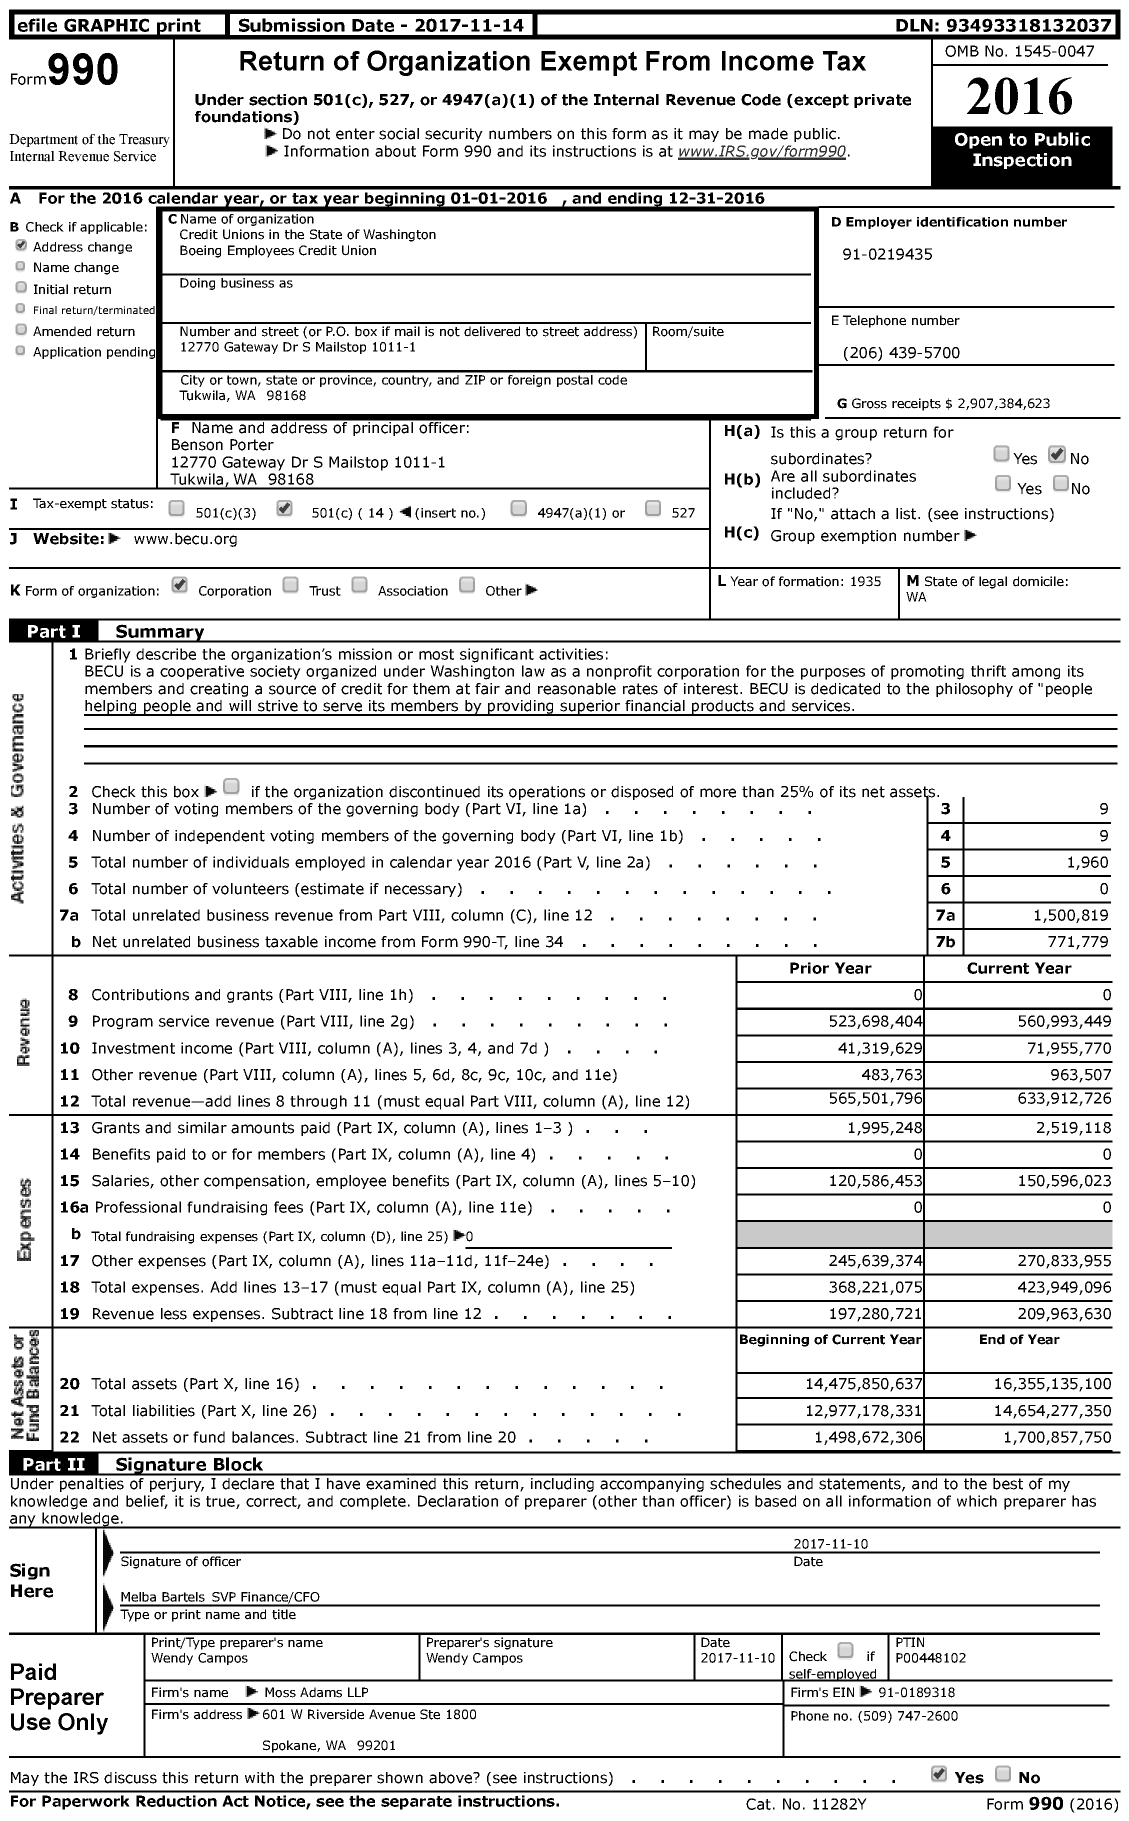 Image of first page of 2016 Form 990 for Credit Unions in the State of Washington Boeing Employees Credit Union (BECU)